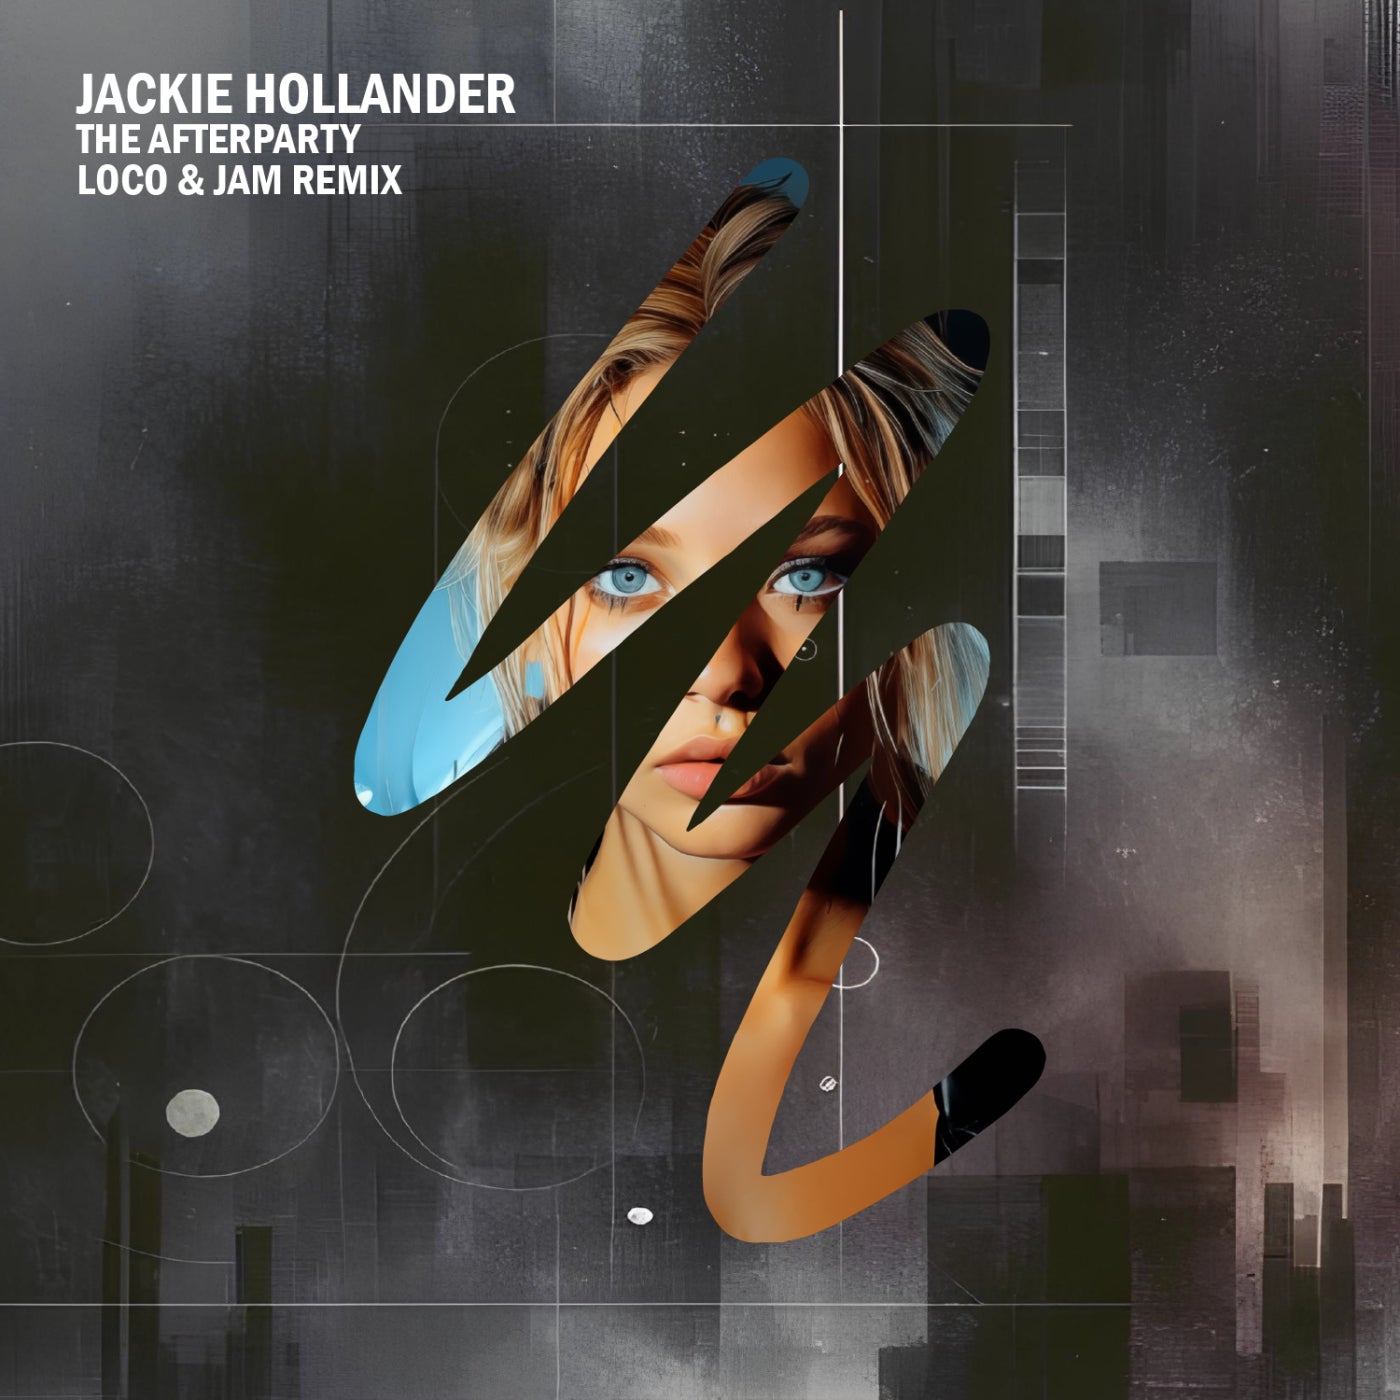 image cover: Jackie Hollander - The Afterparty (Loco & Jam Remix) on There Is A Light